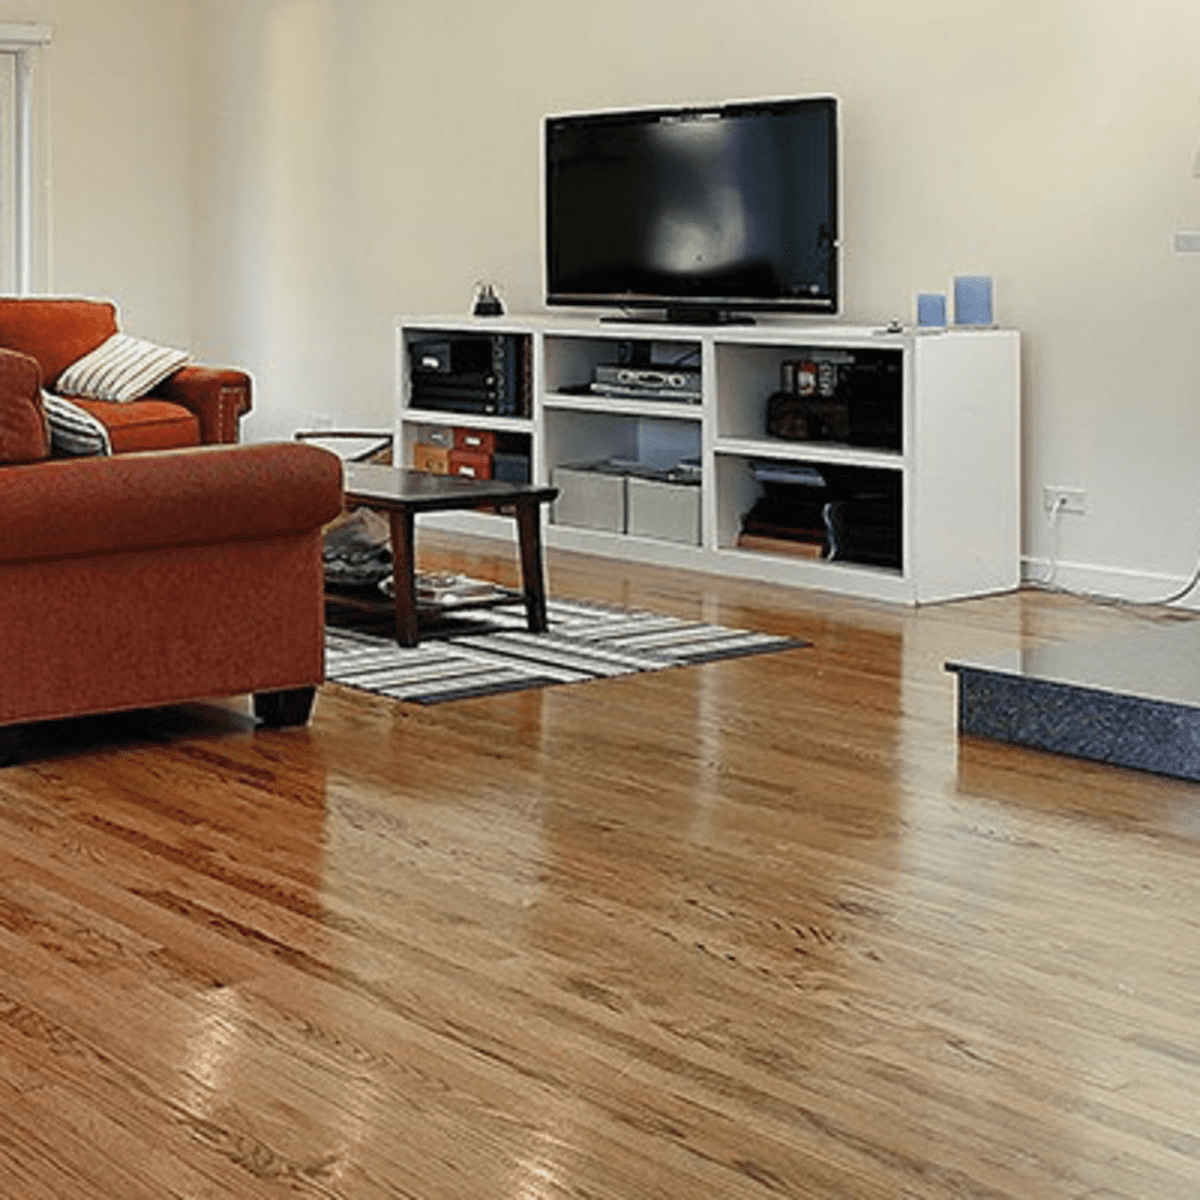 Types Of Bamboo Wood Flooring With, Which Is Better Bamboo Or Oak Flooring